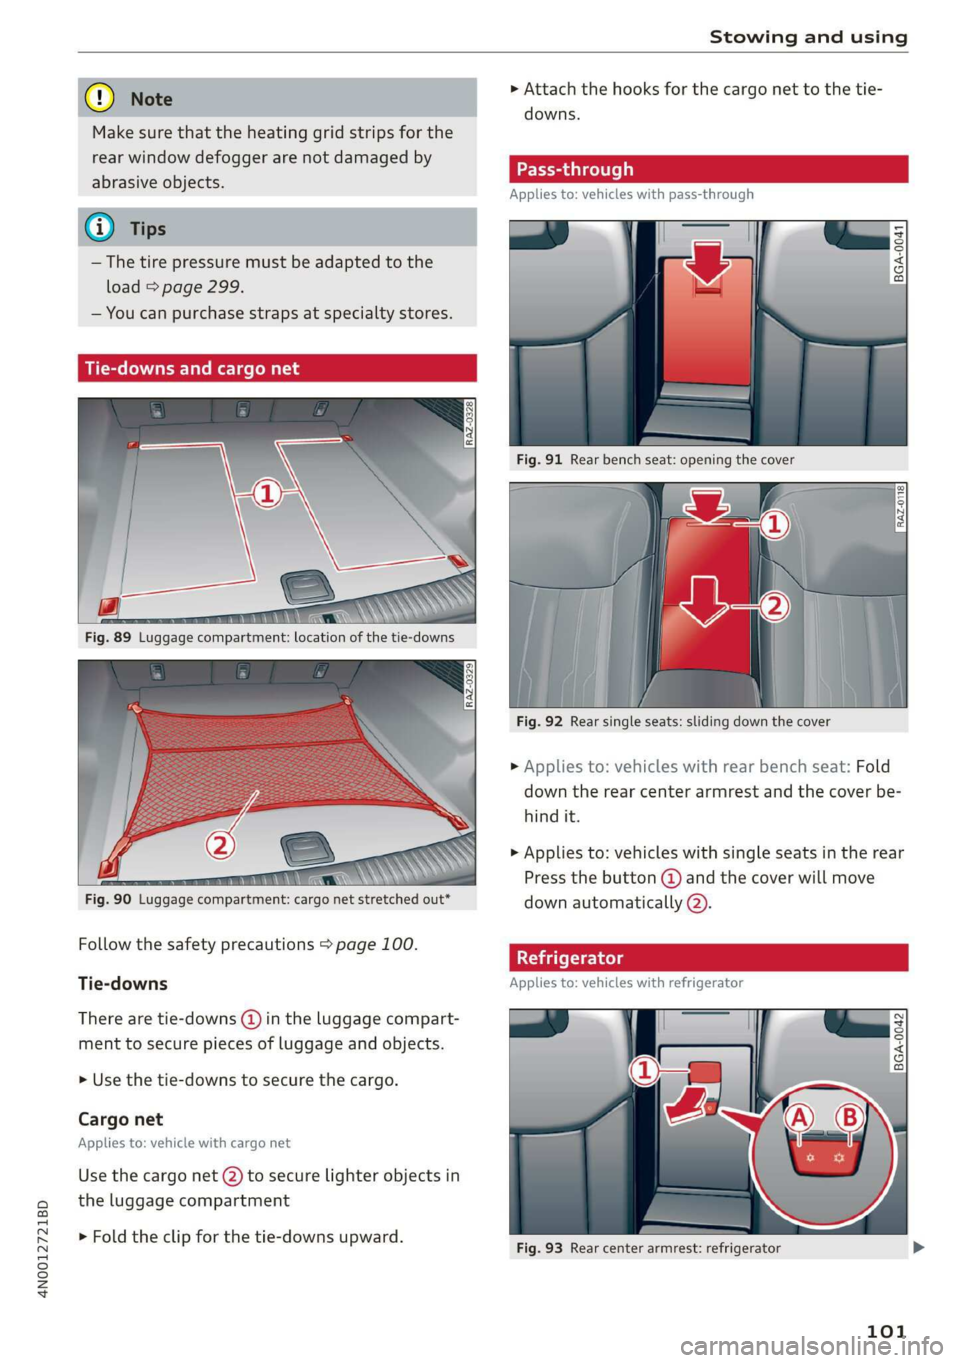 AUDI A8 2020  Owners Manual 4N0012721BD 
Stowing and using 
  
[Oe > Attach the hooks for the cargo net to the tie- 
downs. 
Make sure that the heating grid strips for the 
rear window defogger are not damaged by | 
abrasive obj